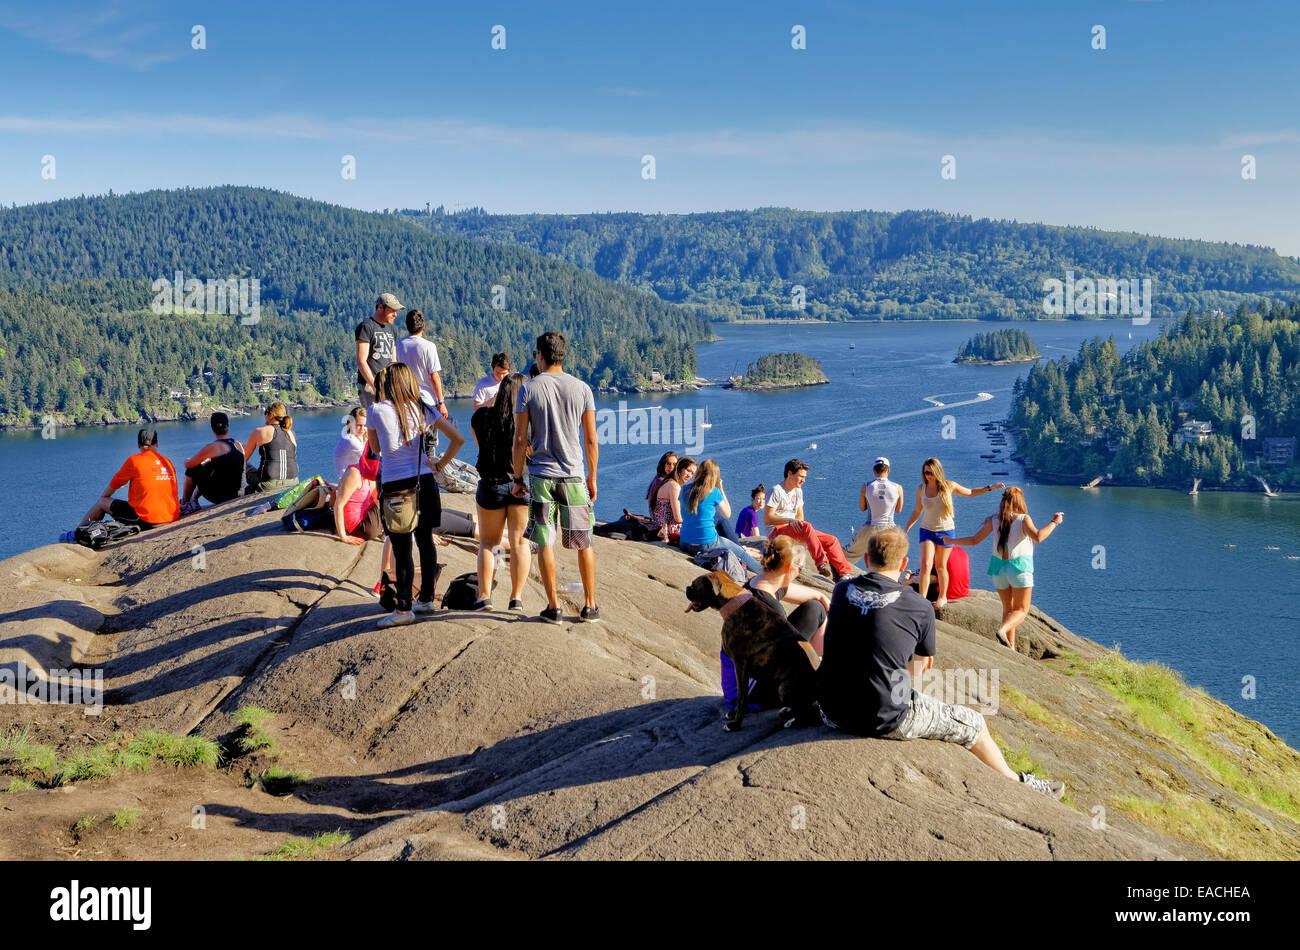 One of the most popular hiking destinations in the Vancouver area is Quarry Rock overlooking  Deep Cove, District of N Vancouver Stock Photo